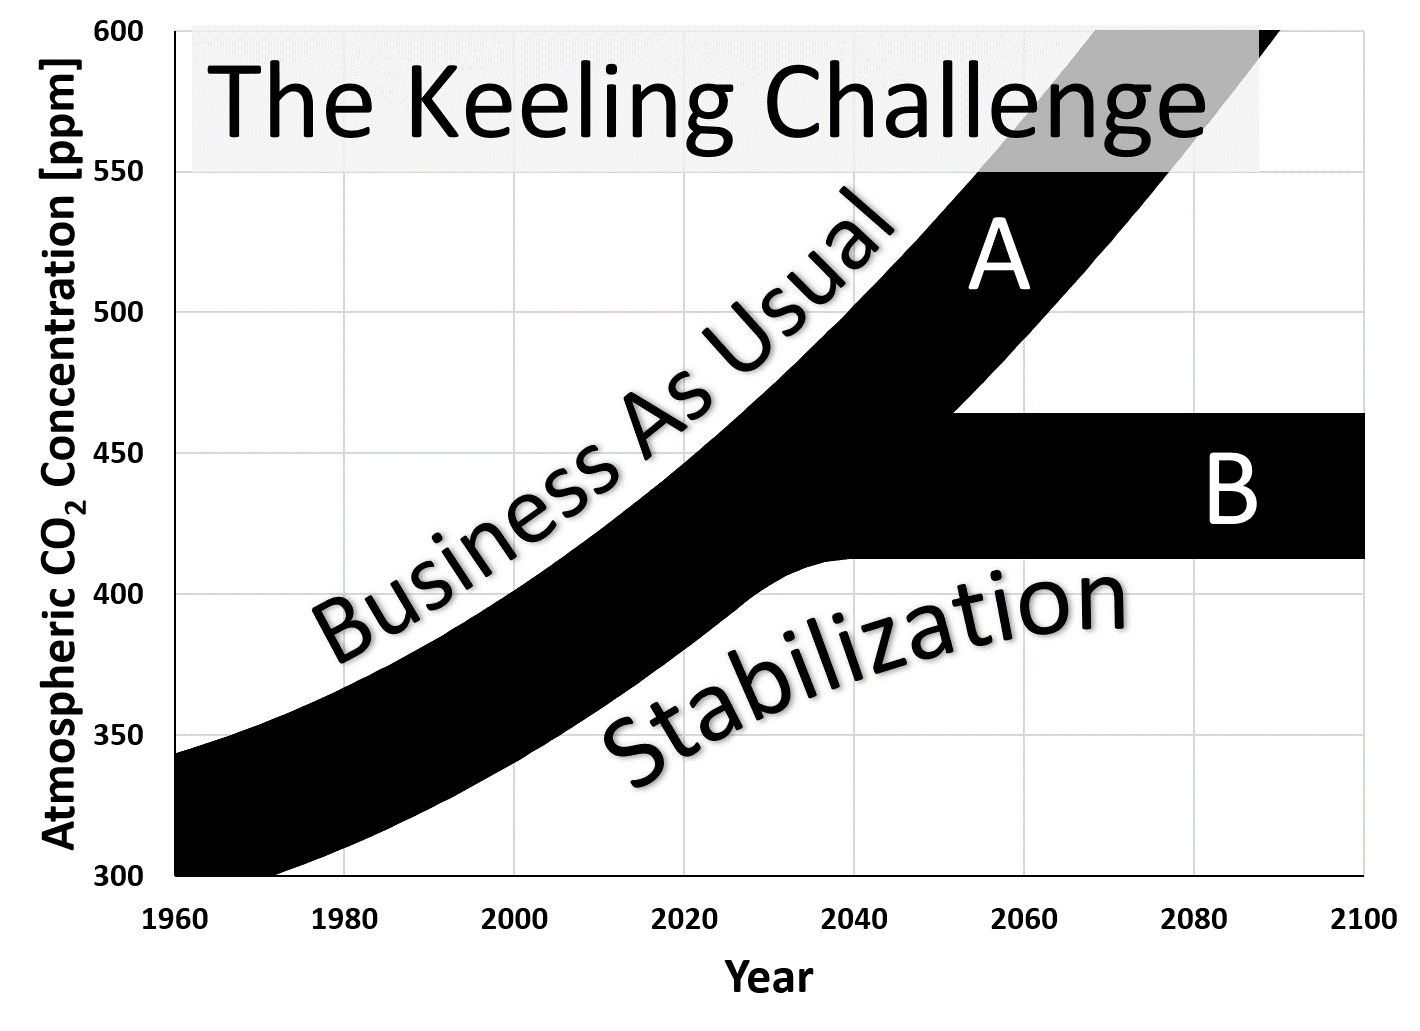 Keeling Curve trend lines projected into future as thick lines that illustrate resistance to change